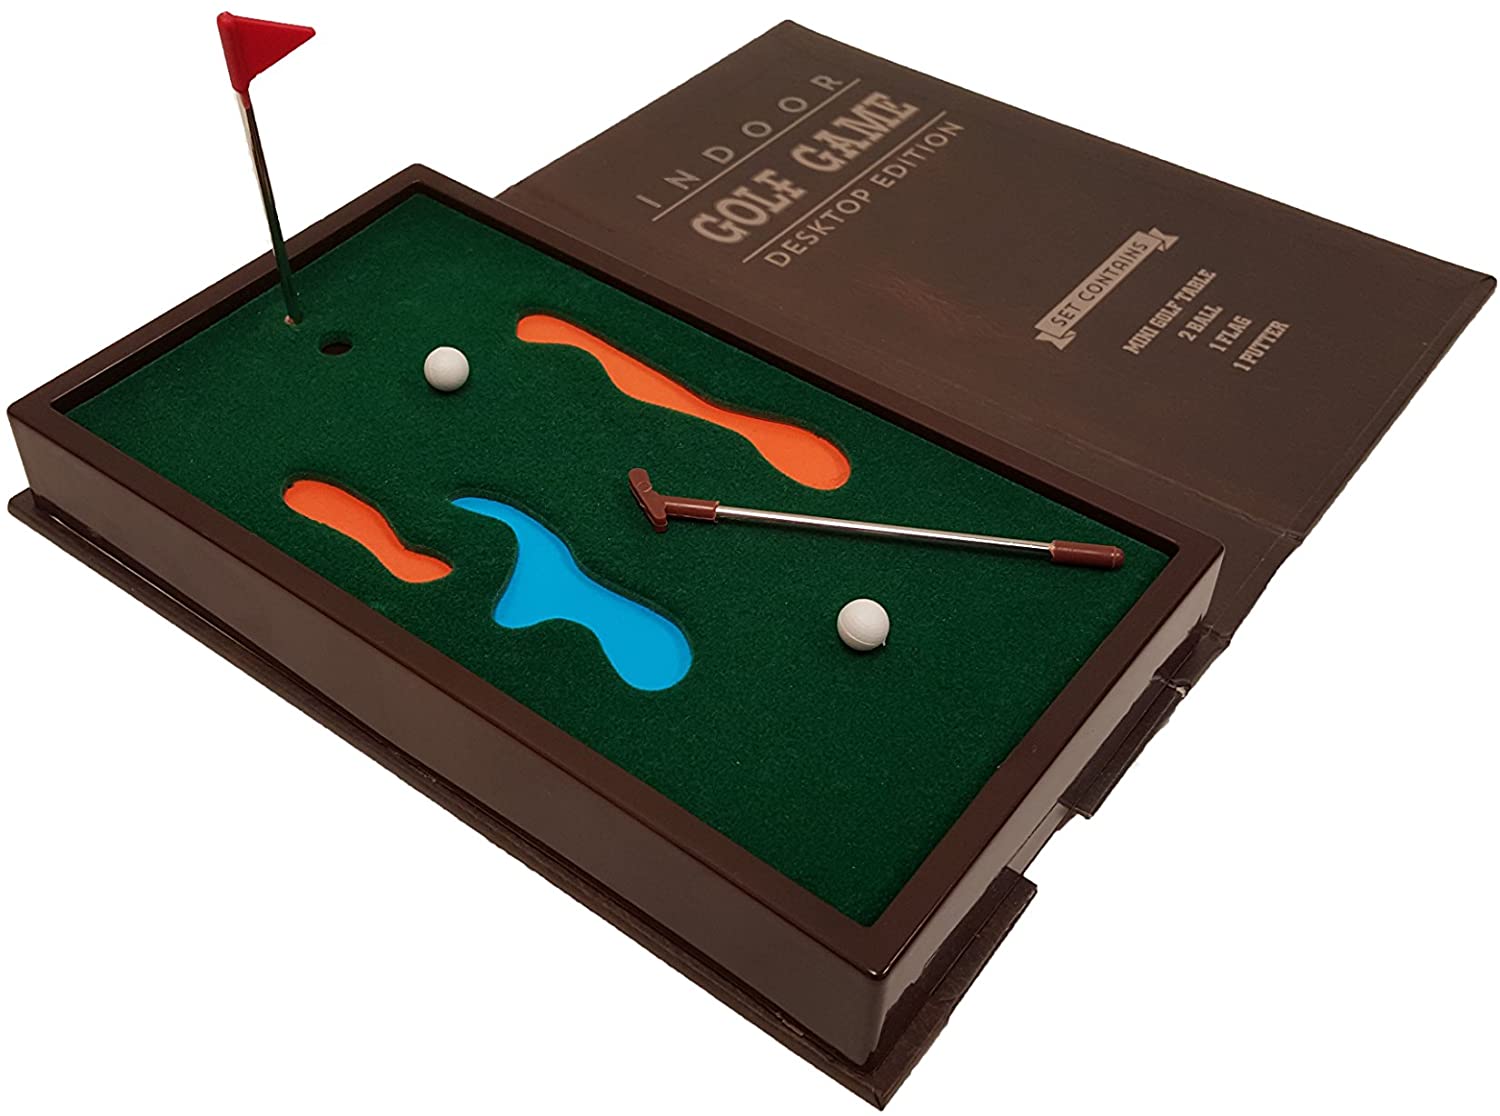 A Fun, Inexpensive Golf-Related Employee Gift Idea 